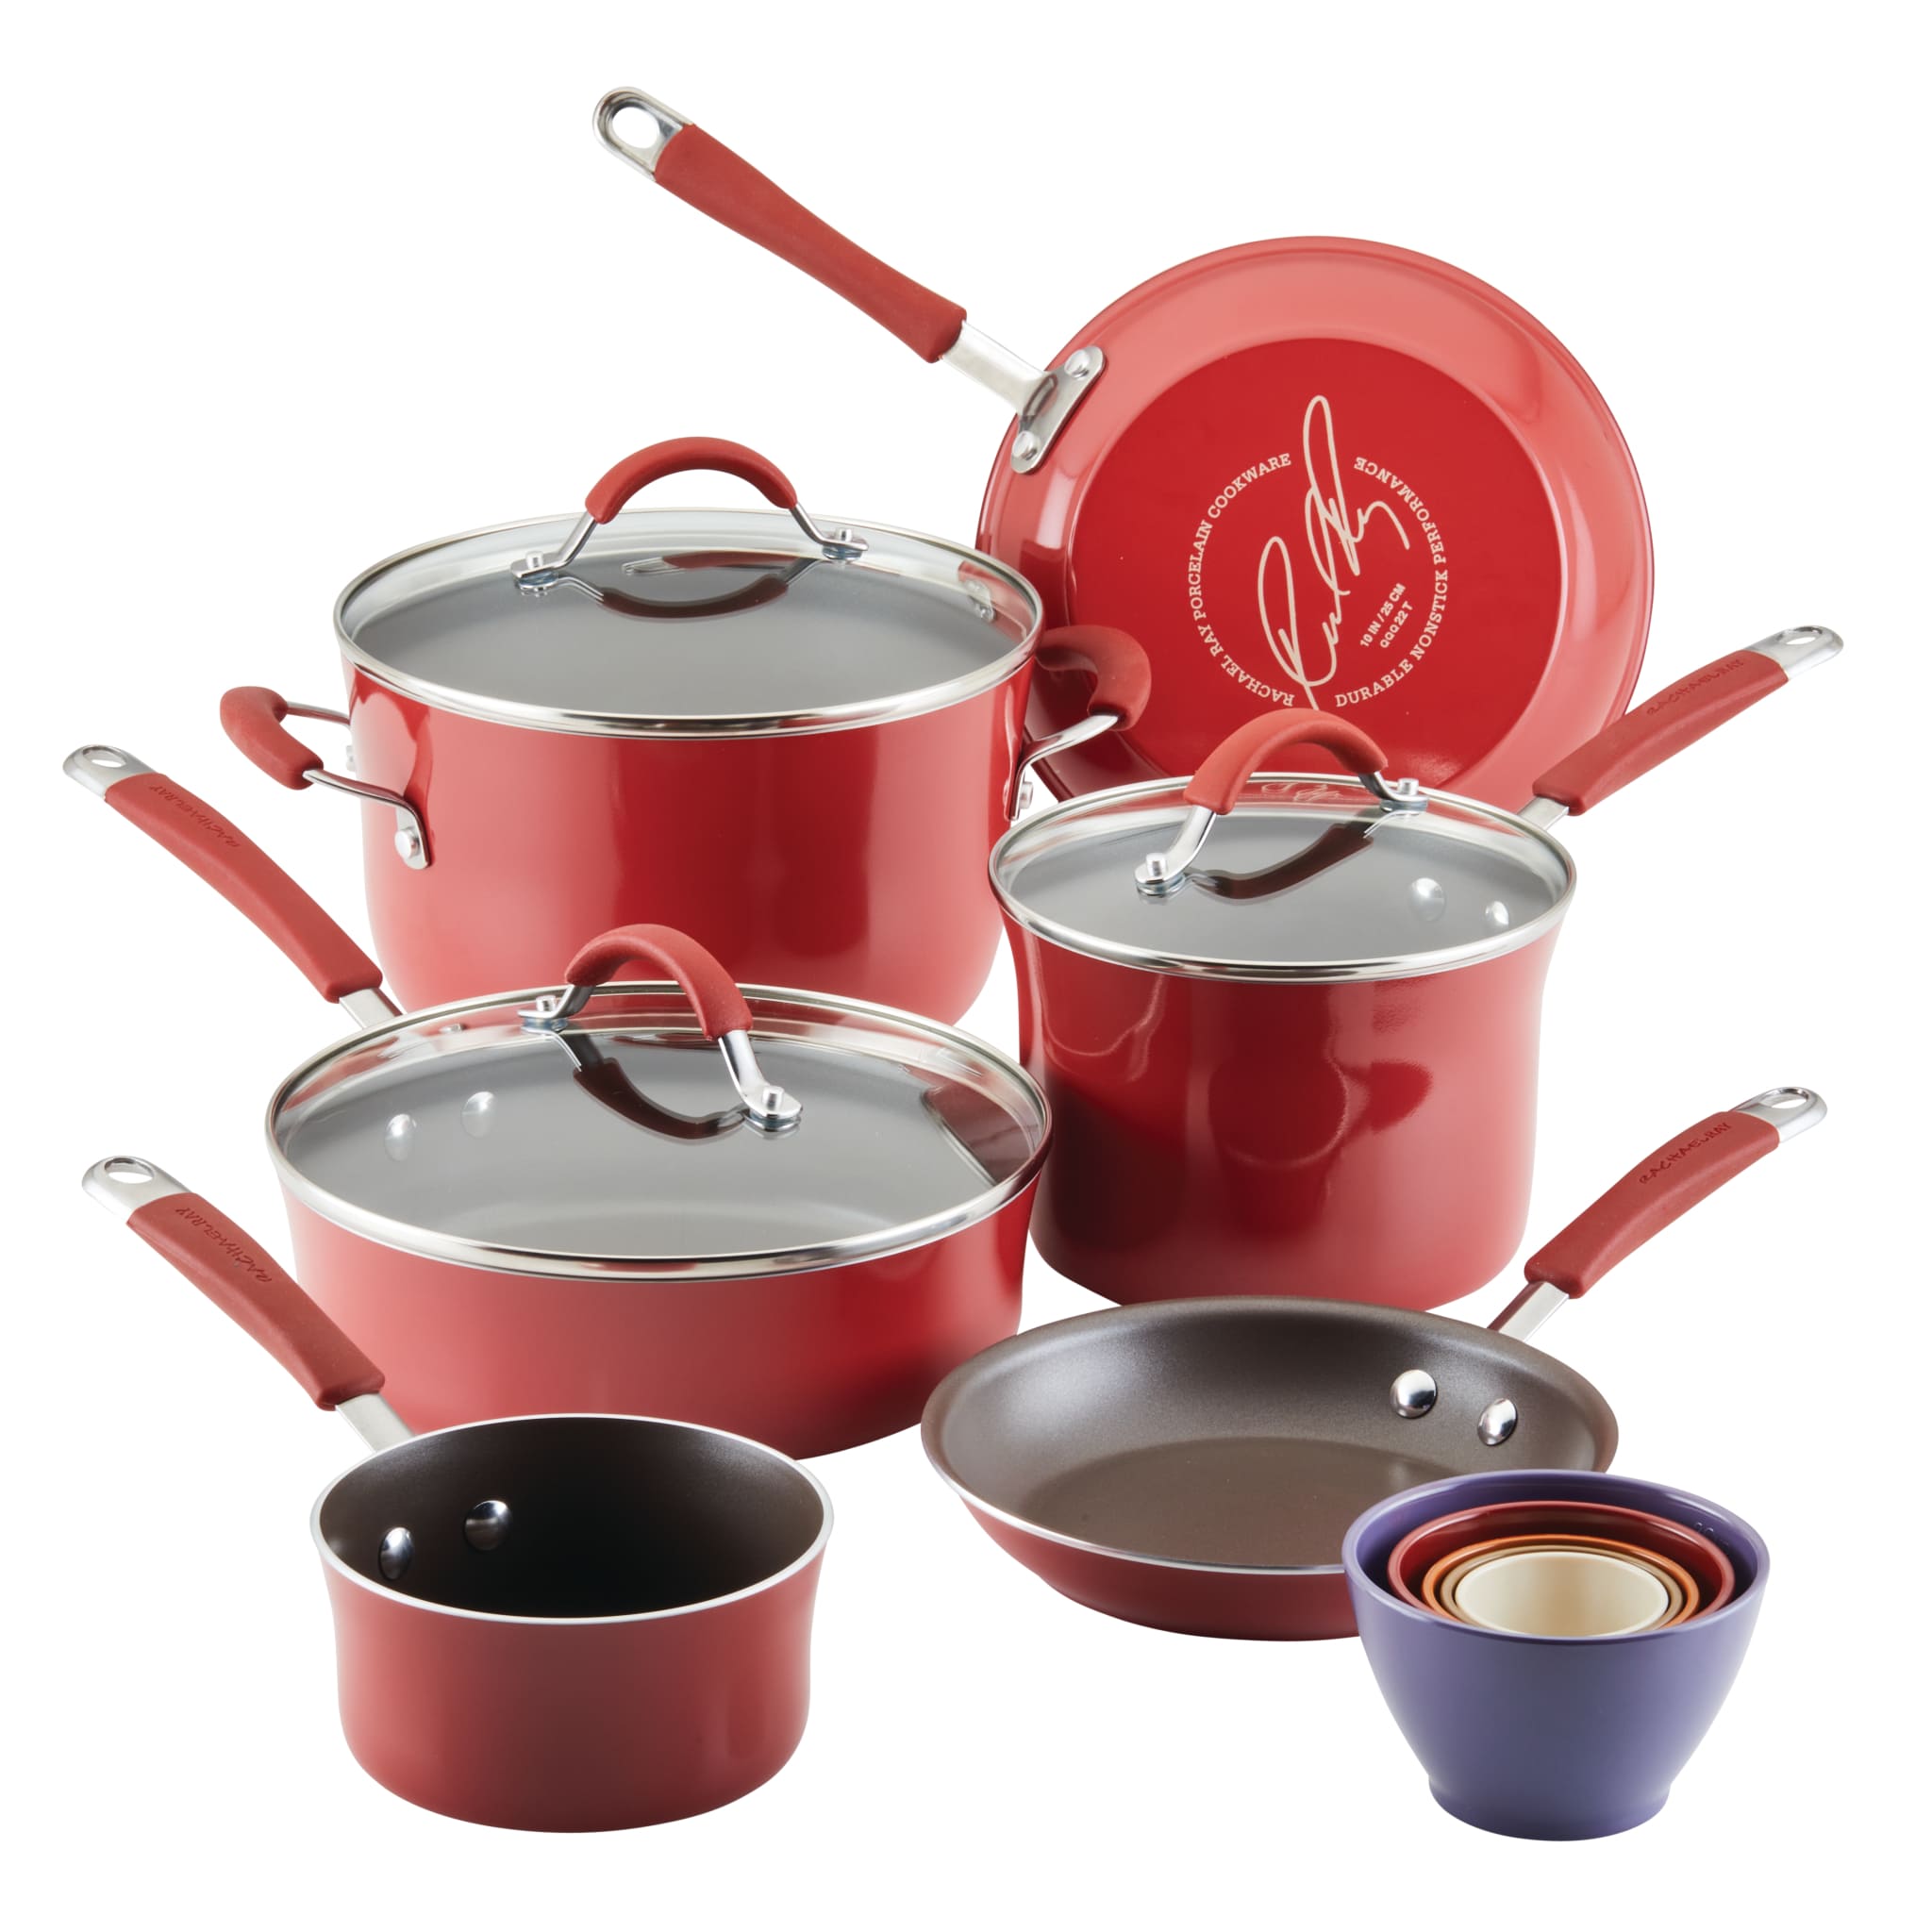 14-Piece Nonstick Cookware and Measuring Cup Set | Cranberry Red